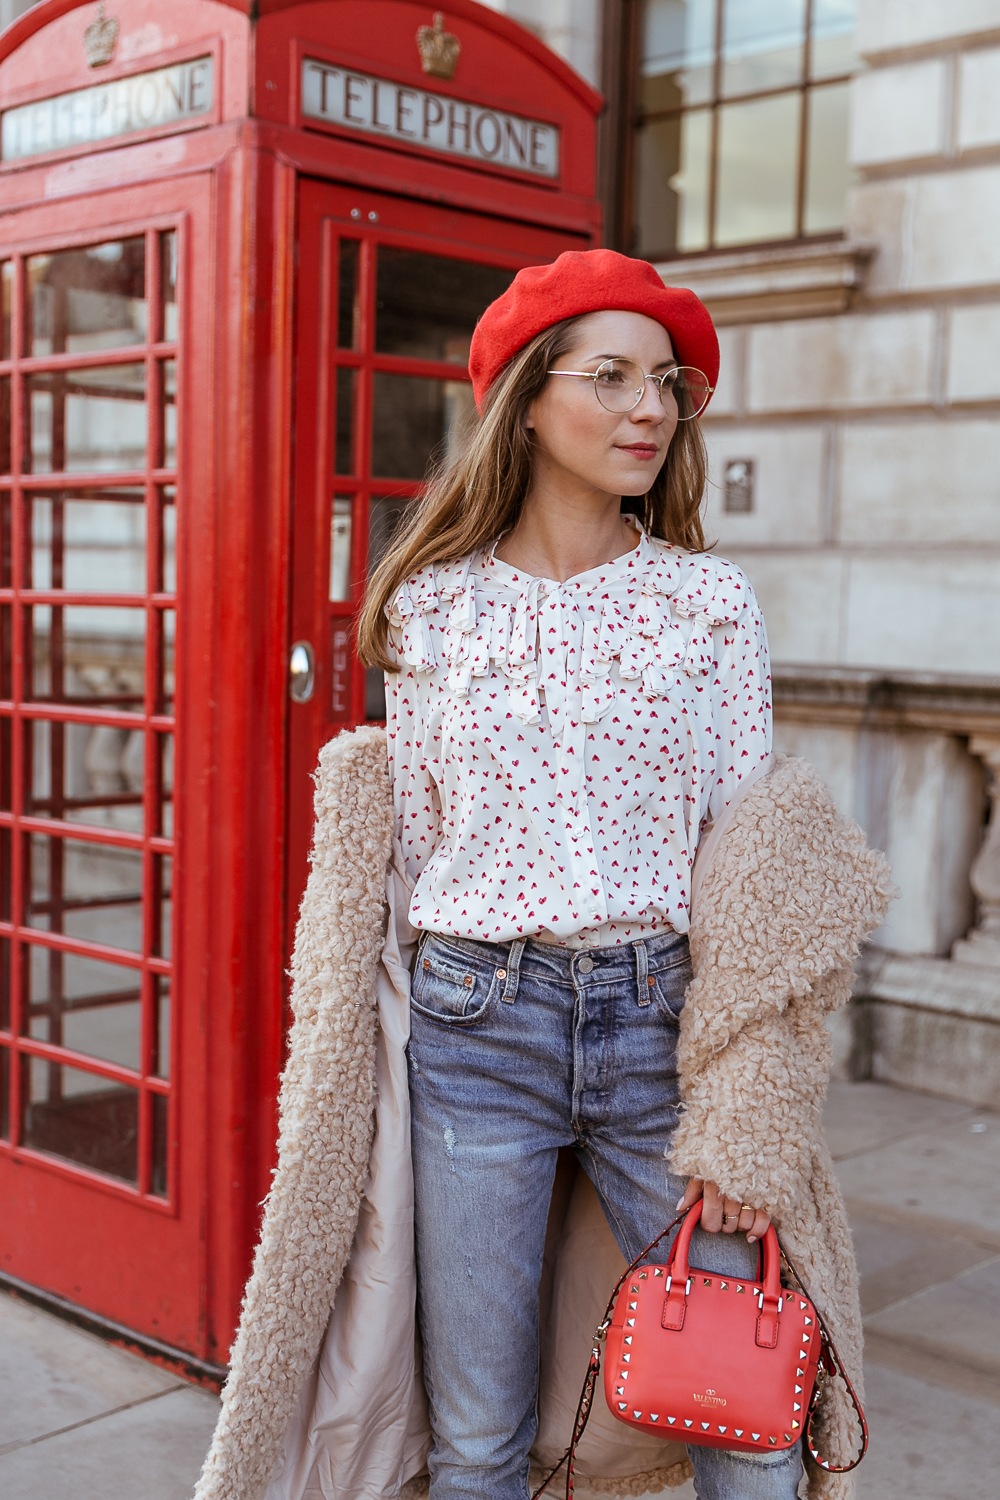 teddy coat levis 501 jeans red hat steffen schraut blouse hearts red valentino bag outfit street style london white boots veja du 3